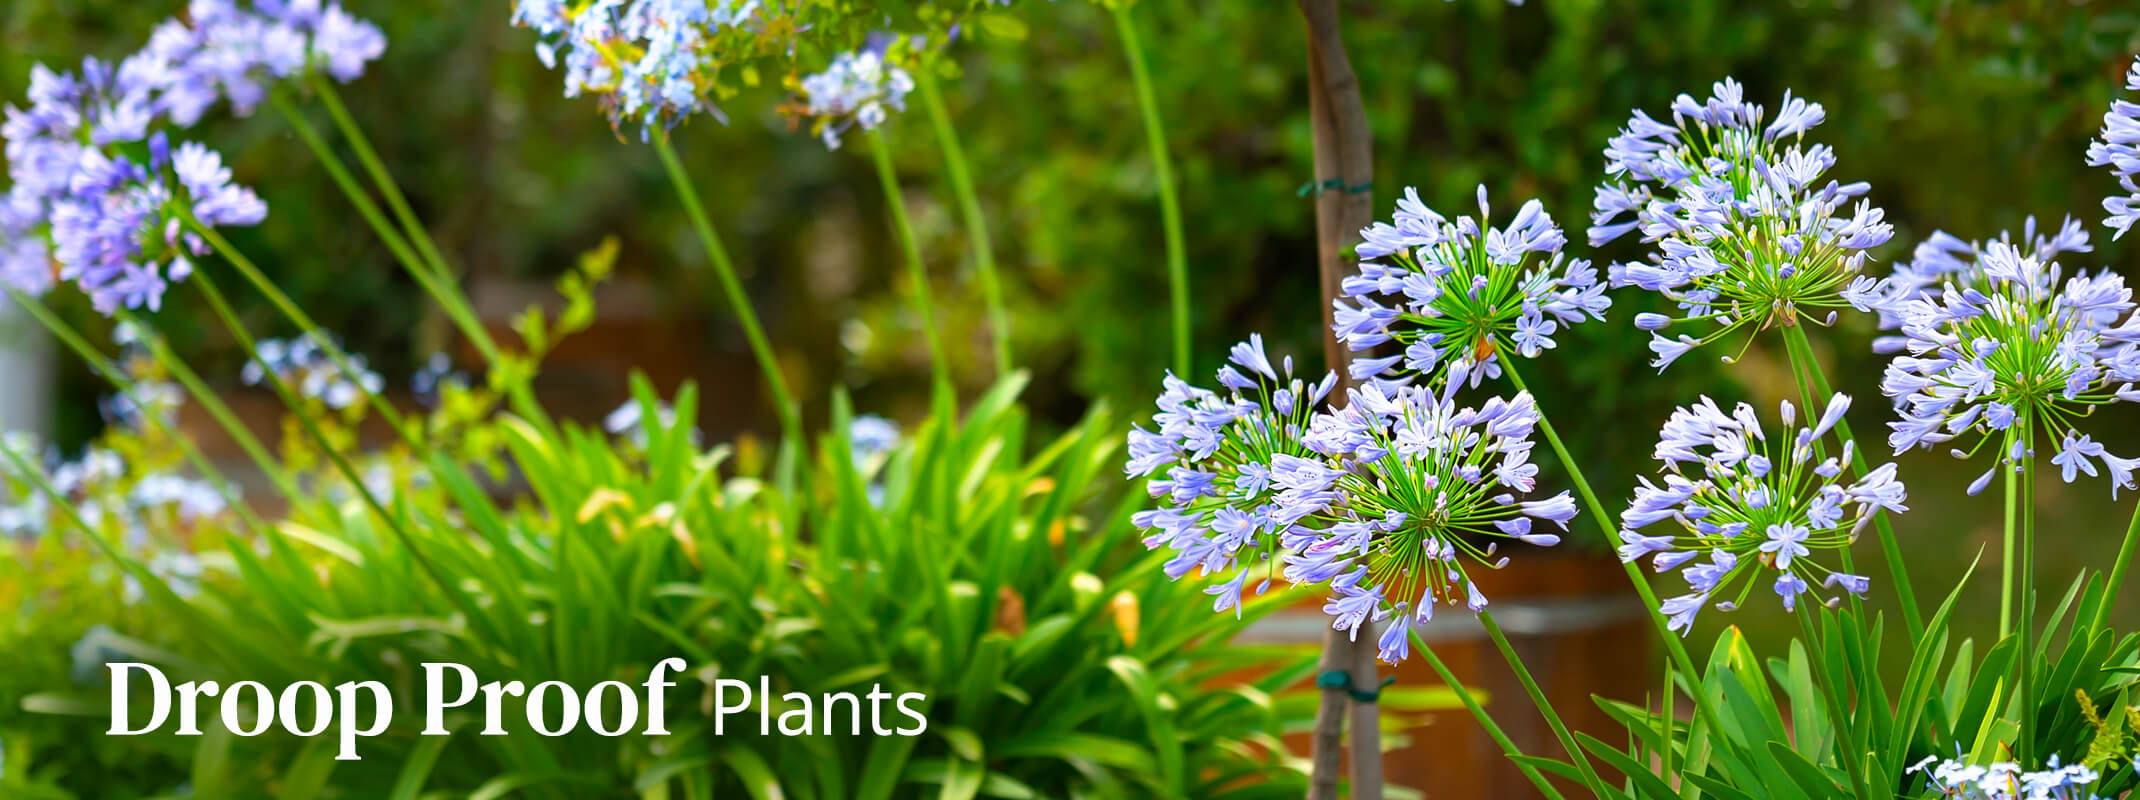 Agapanthus or lily of the nile perennials in a landscape with the words: droop proof plants on the image